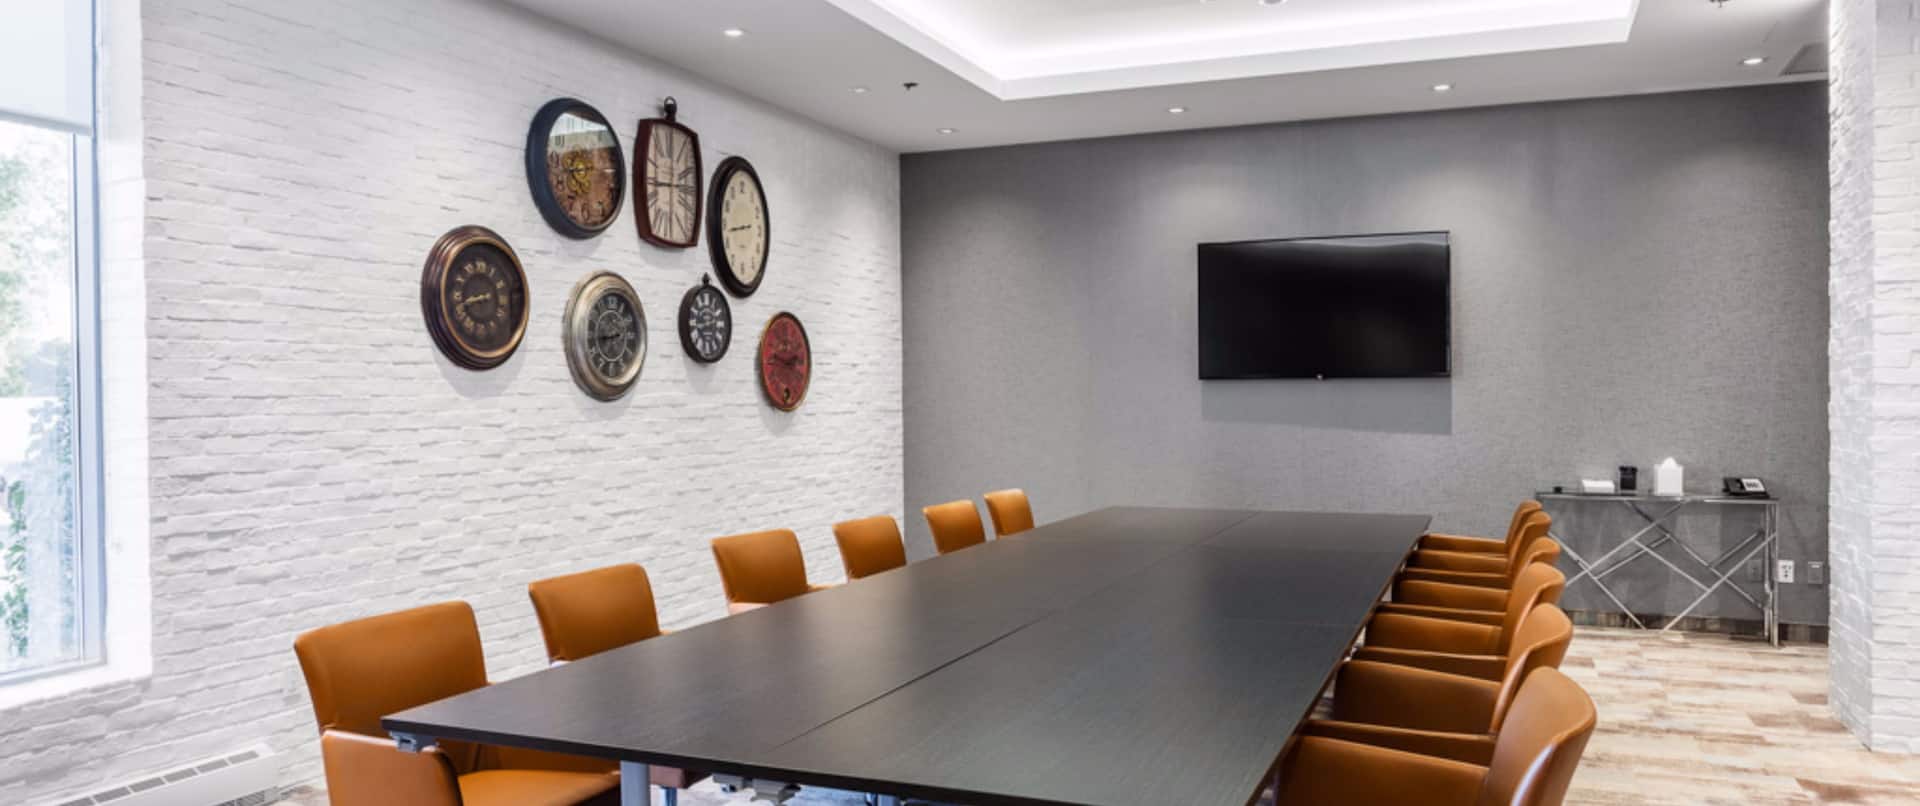 Boardroom Meeting Table, Office Chairs and Wall Mounted HDTV